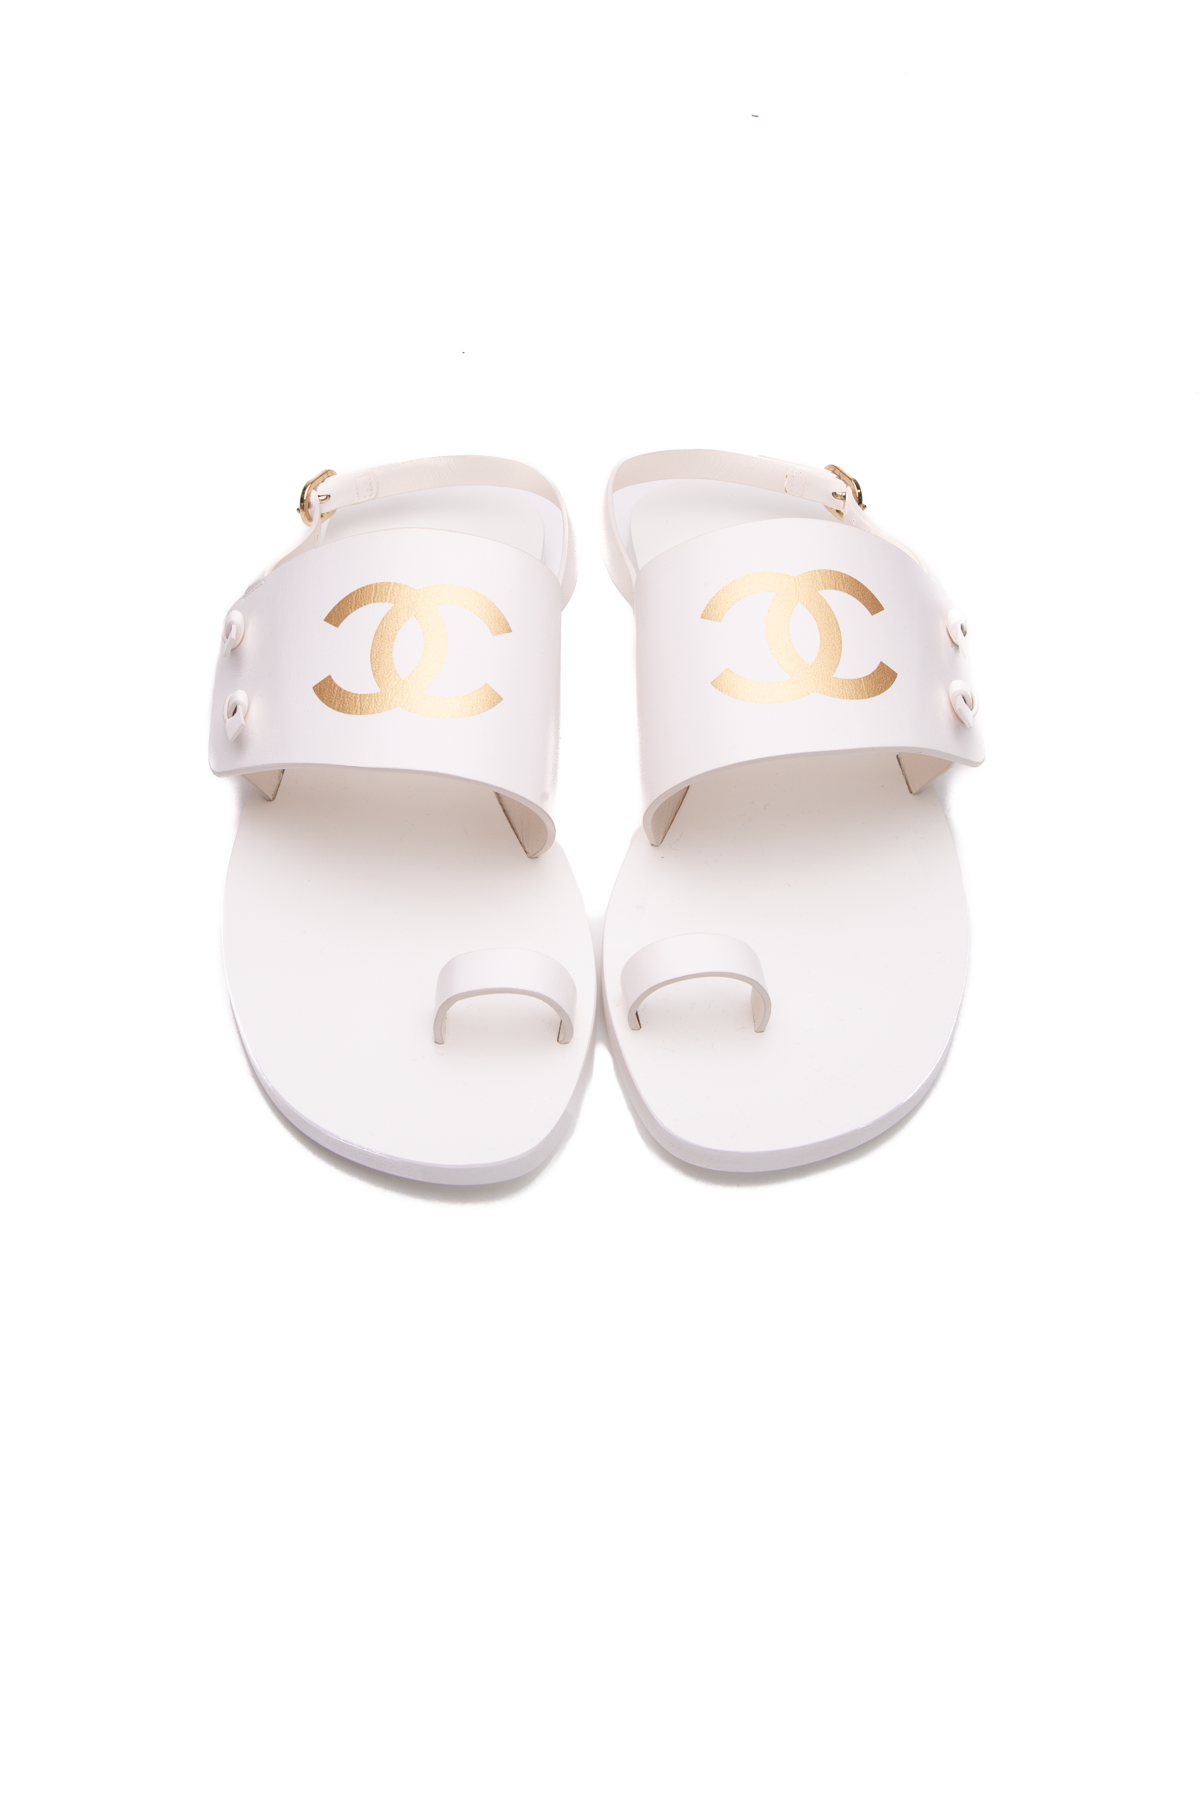 Chanel CC Flat Sandals - Size 38 - Couture USA